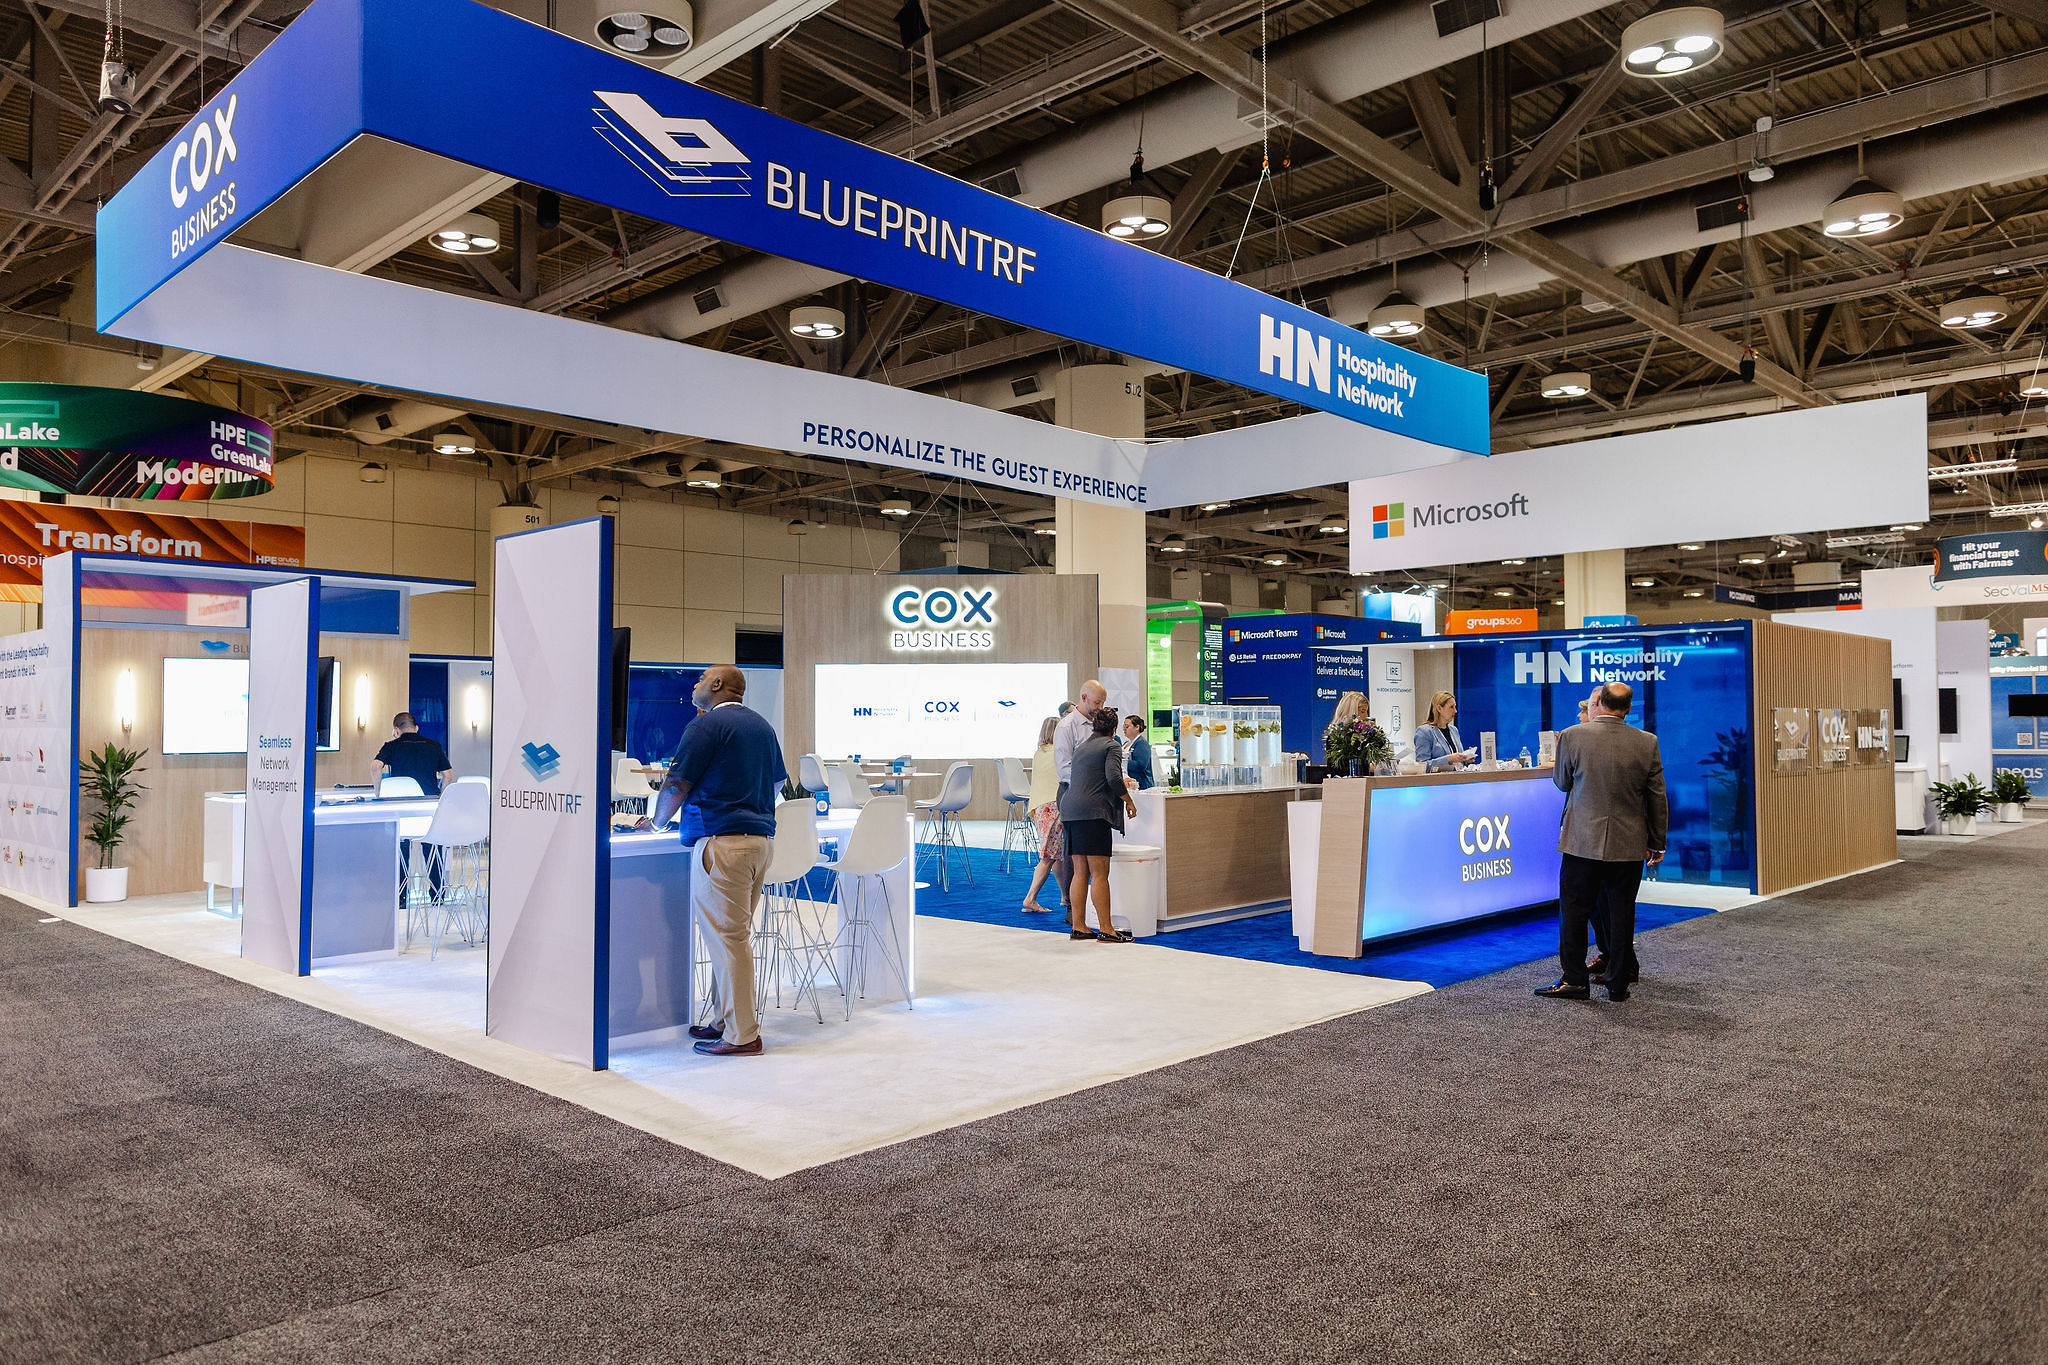 Trade show booth, blue and white color scheme.